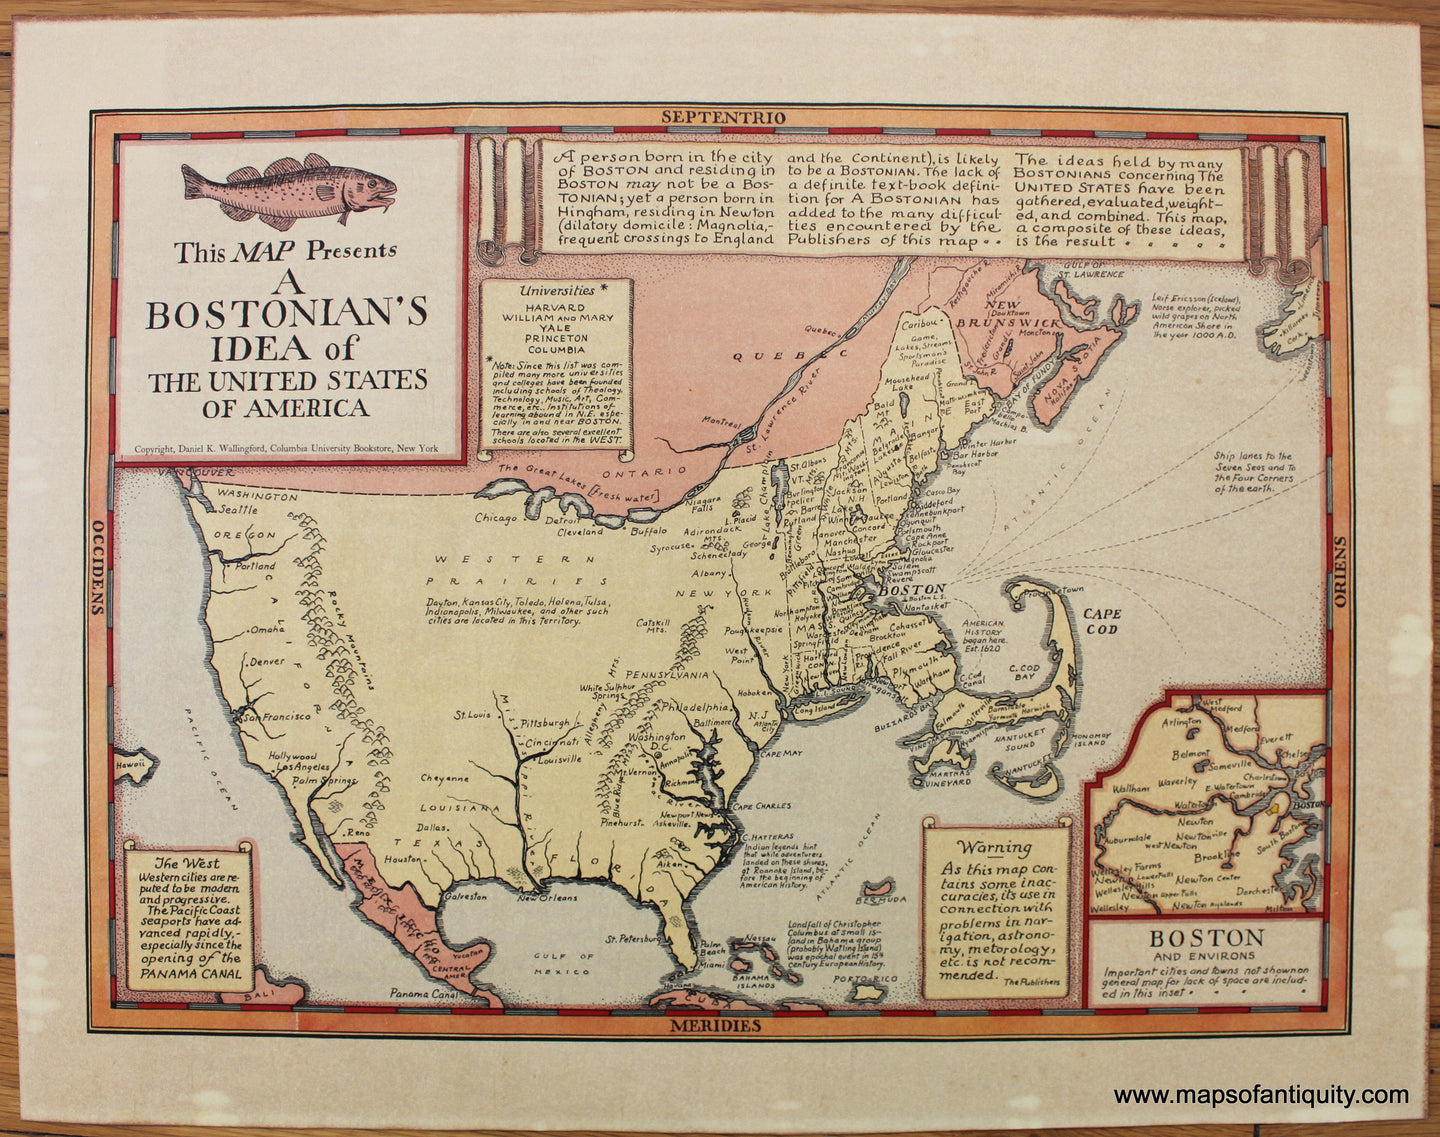 Antique-Map-Pictorial-This-Map-Presents-A-Bostonian's-Idea-of-the-United-States-of-America-c.-1937-Daniel-WallingfordMaps-of-Antiquity